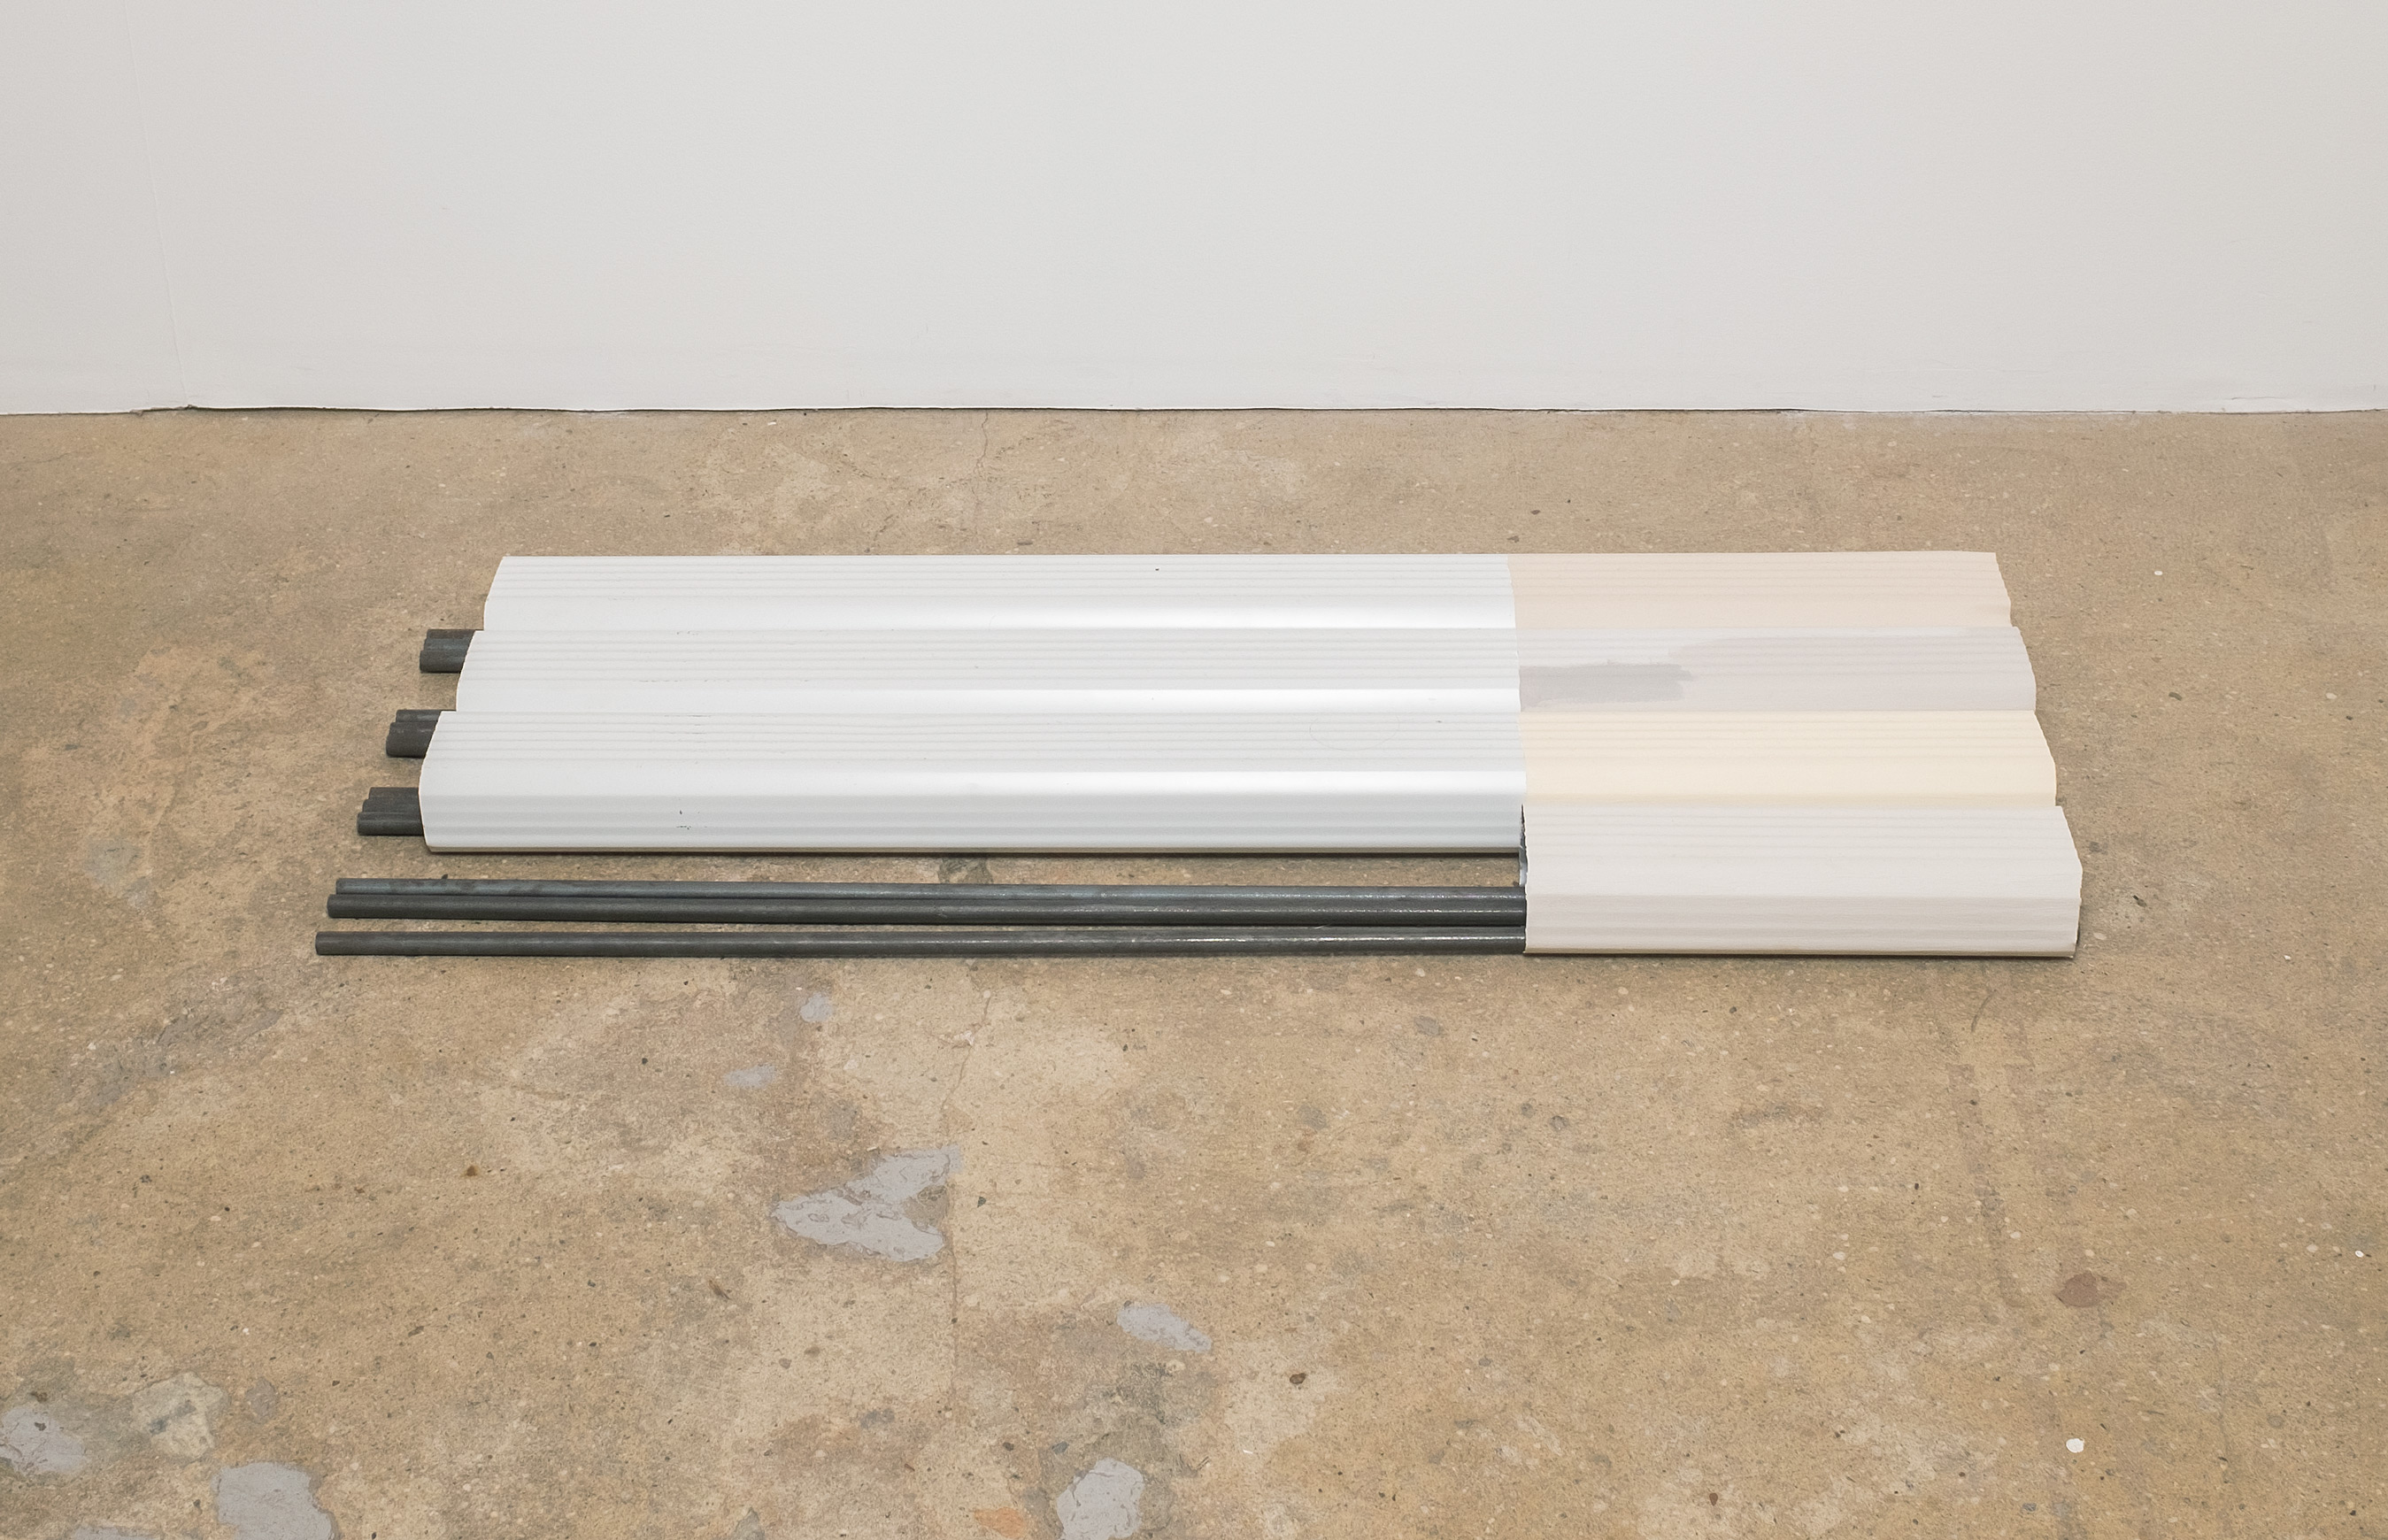 Linnea Kniaz, Surface Sequence 12, 2019, aluminum downspout, acrylic, and steel rod, 2h x 13w x 38d in.